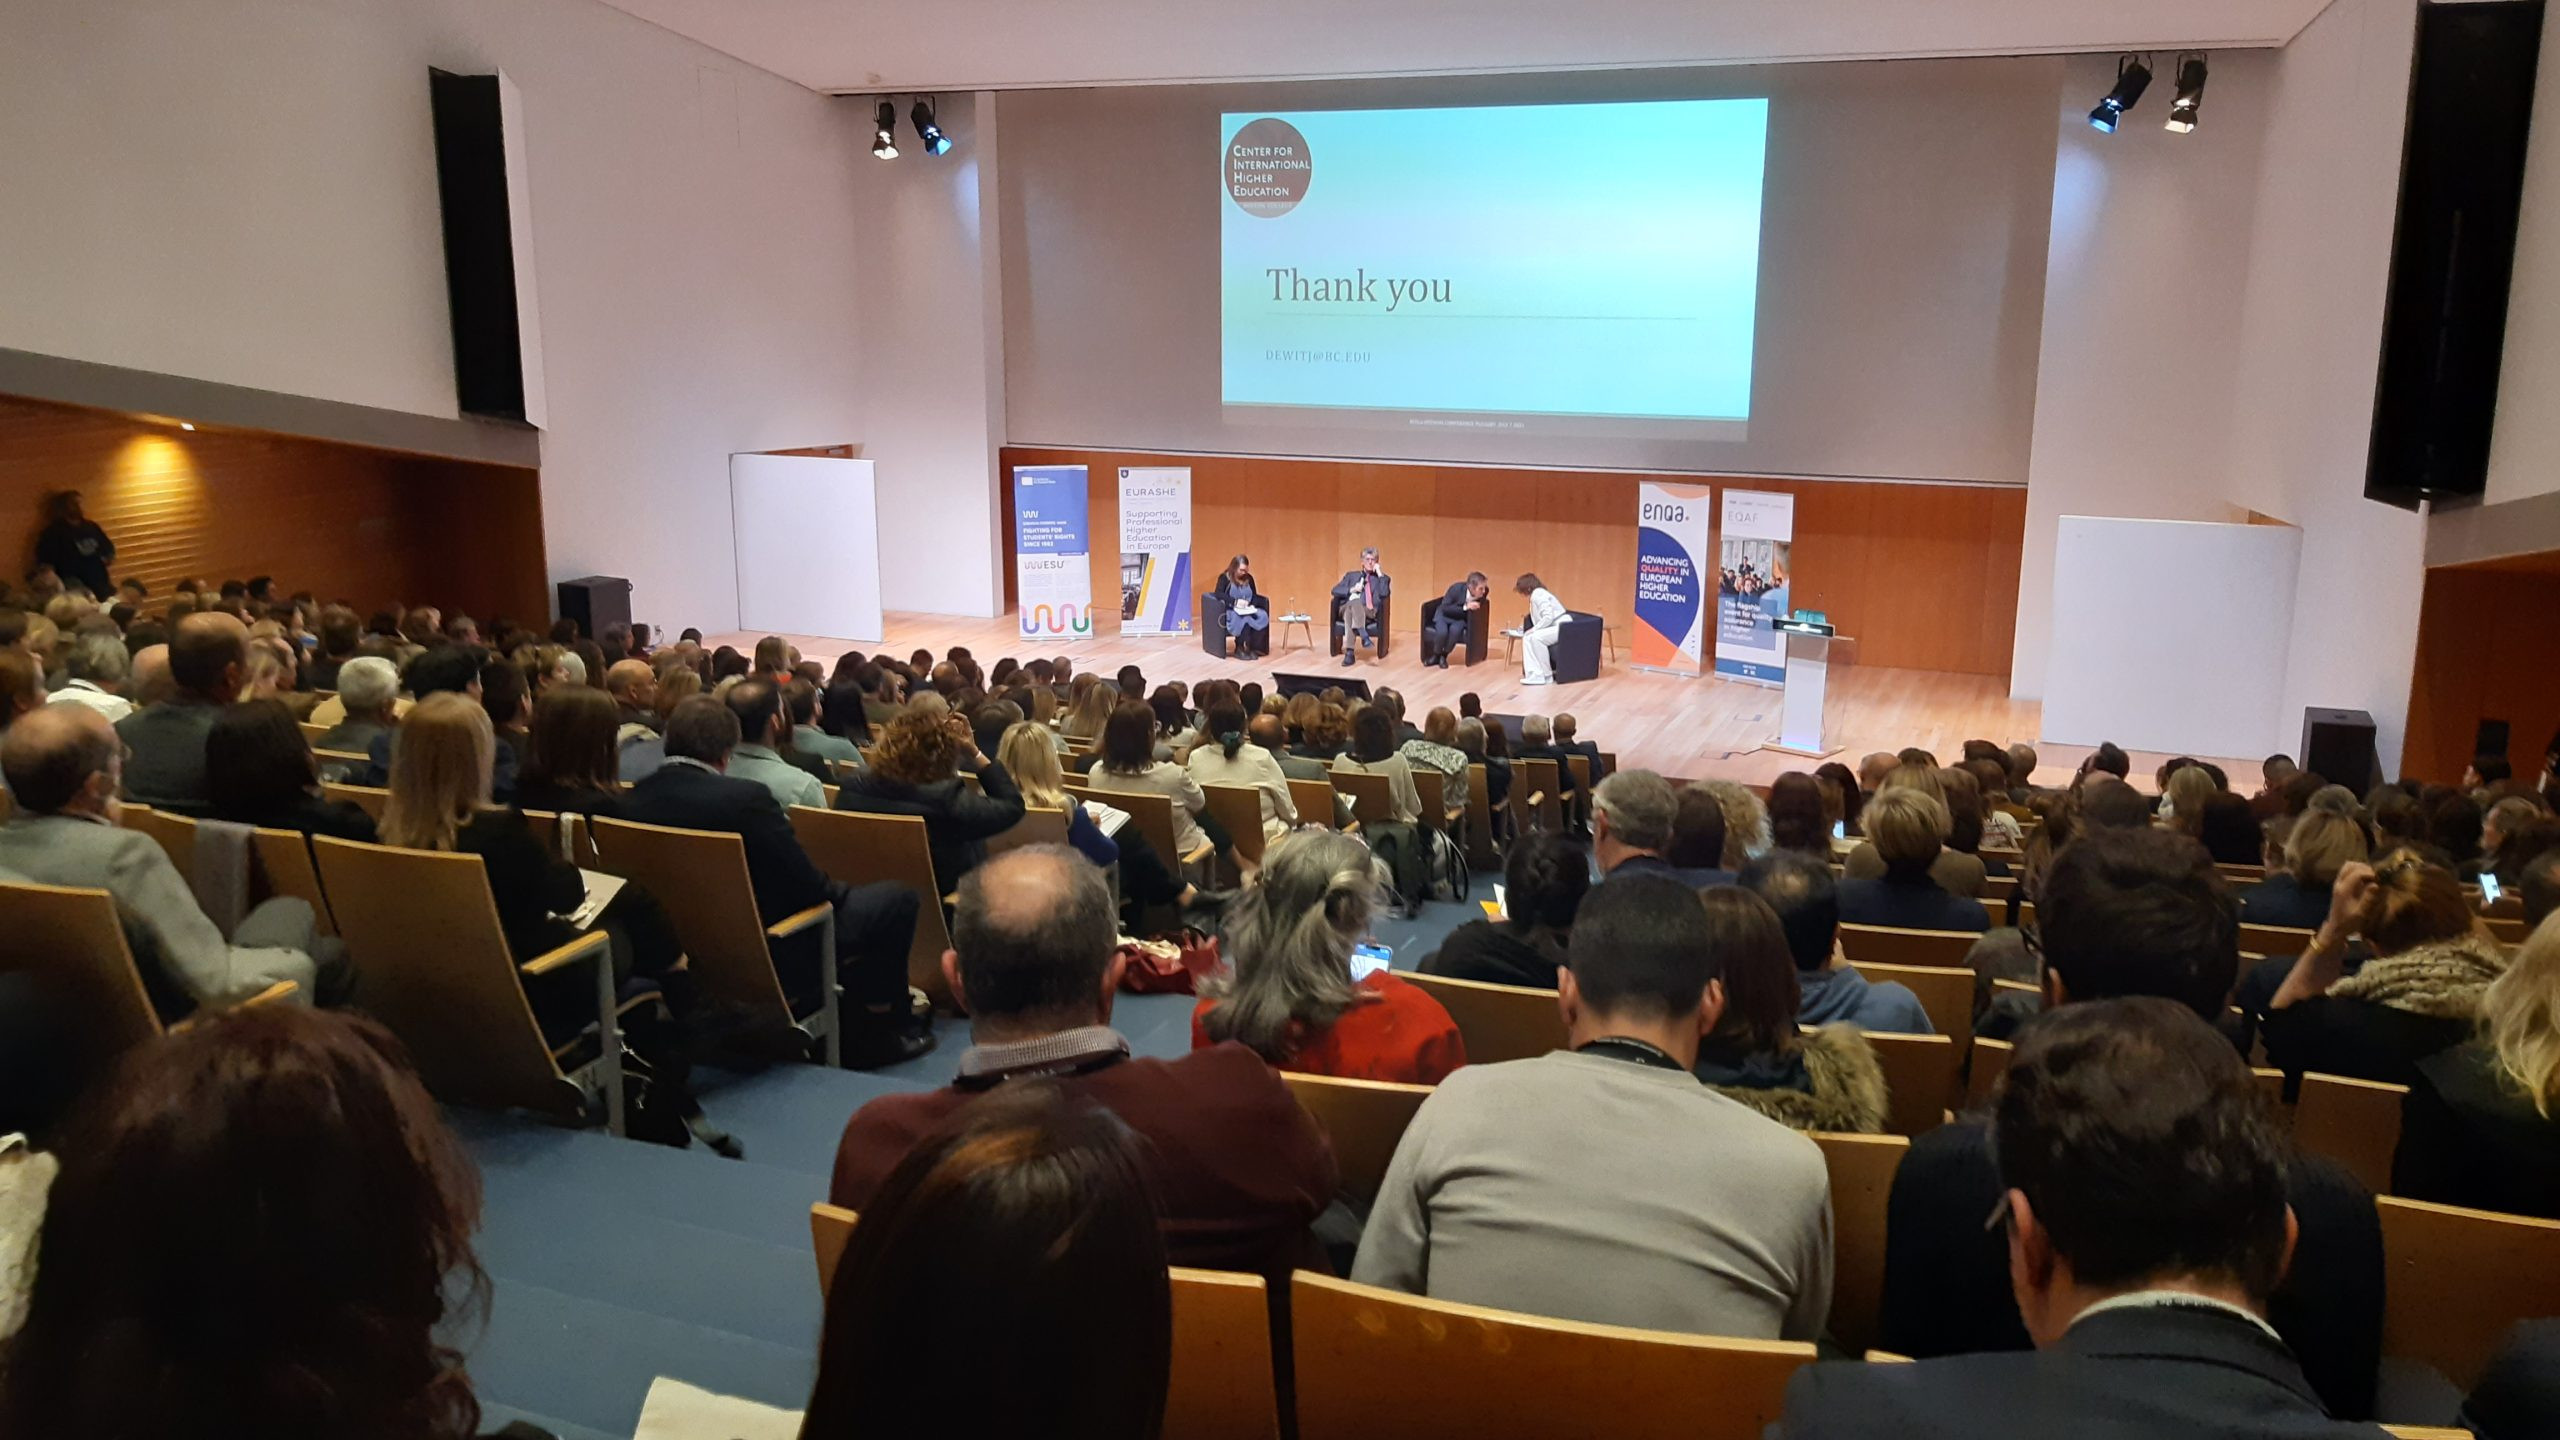 Full auditorium at the EQAF event held in Portugal